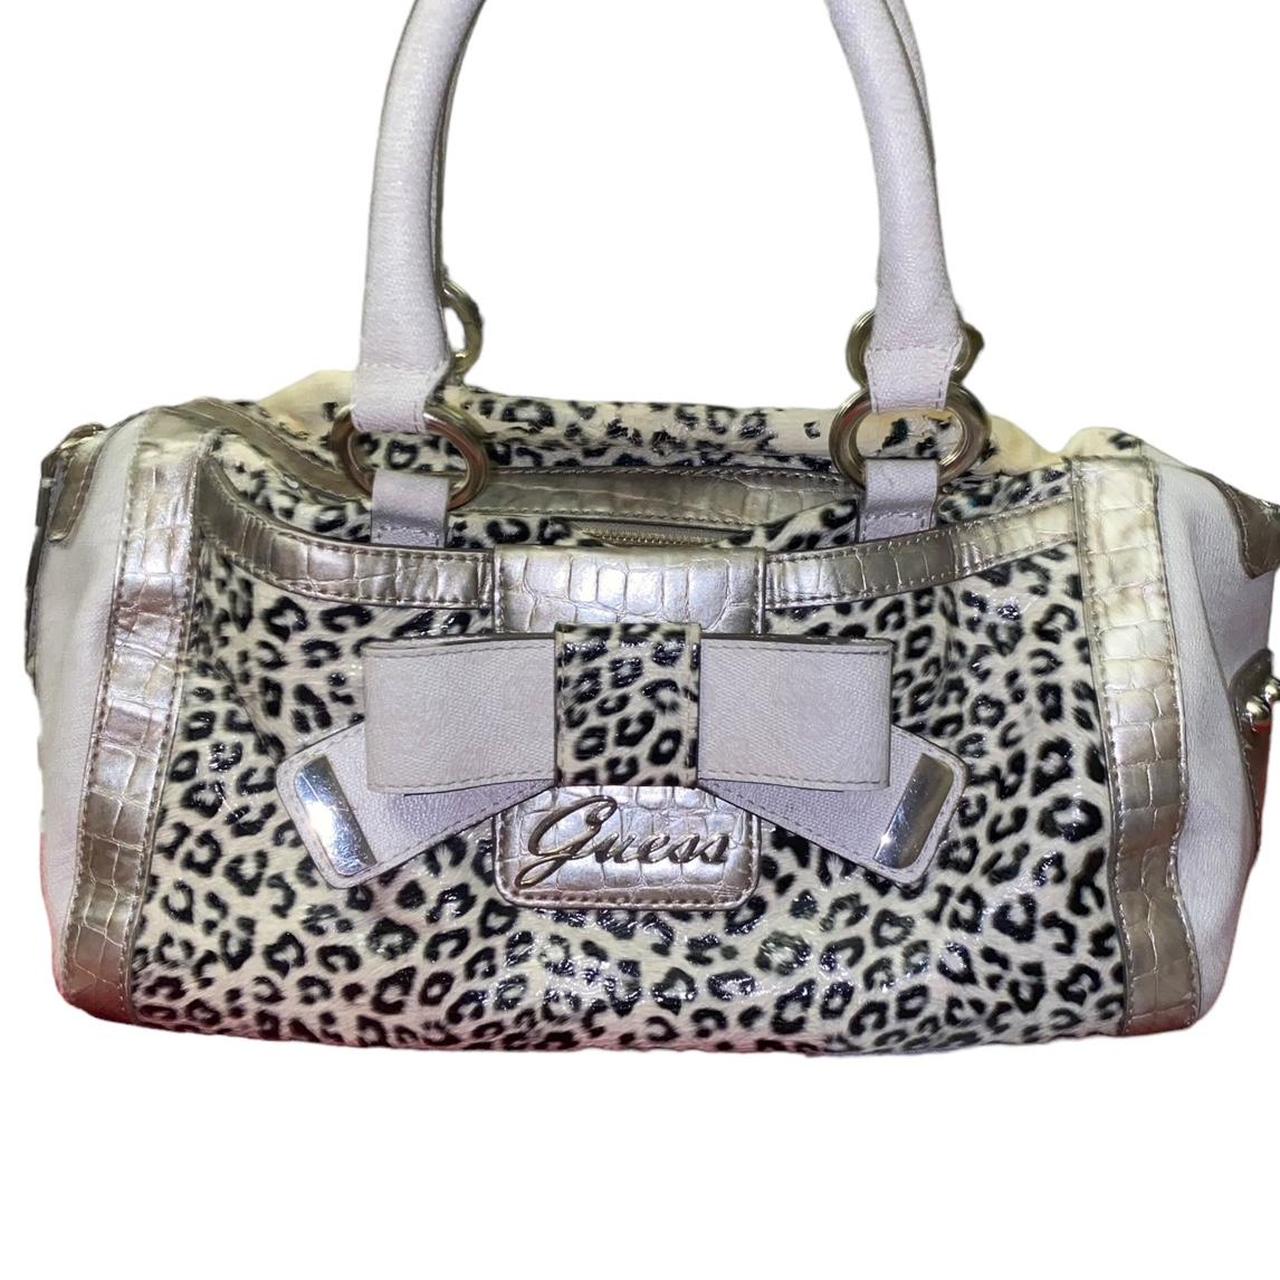 WOMENS GUESS PURSE BLACK LEATHER W DANGLE “GUESS” ON CHAIN. LEOPARD PRINT  LINER | Guess purses, Purses, Black leather